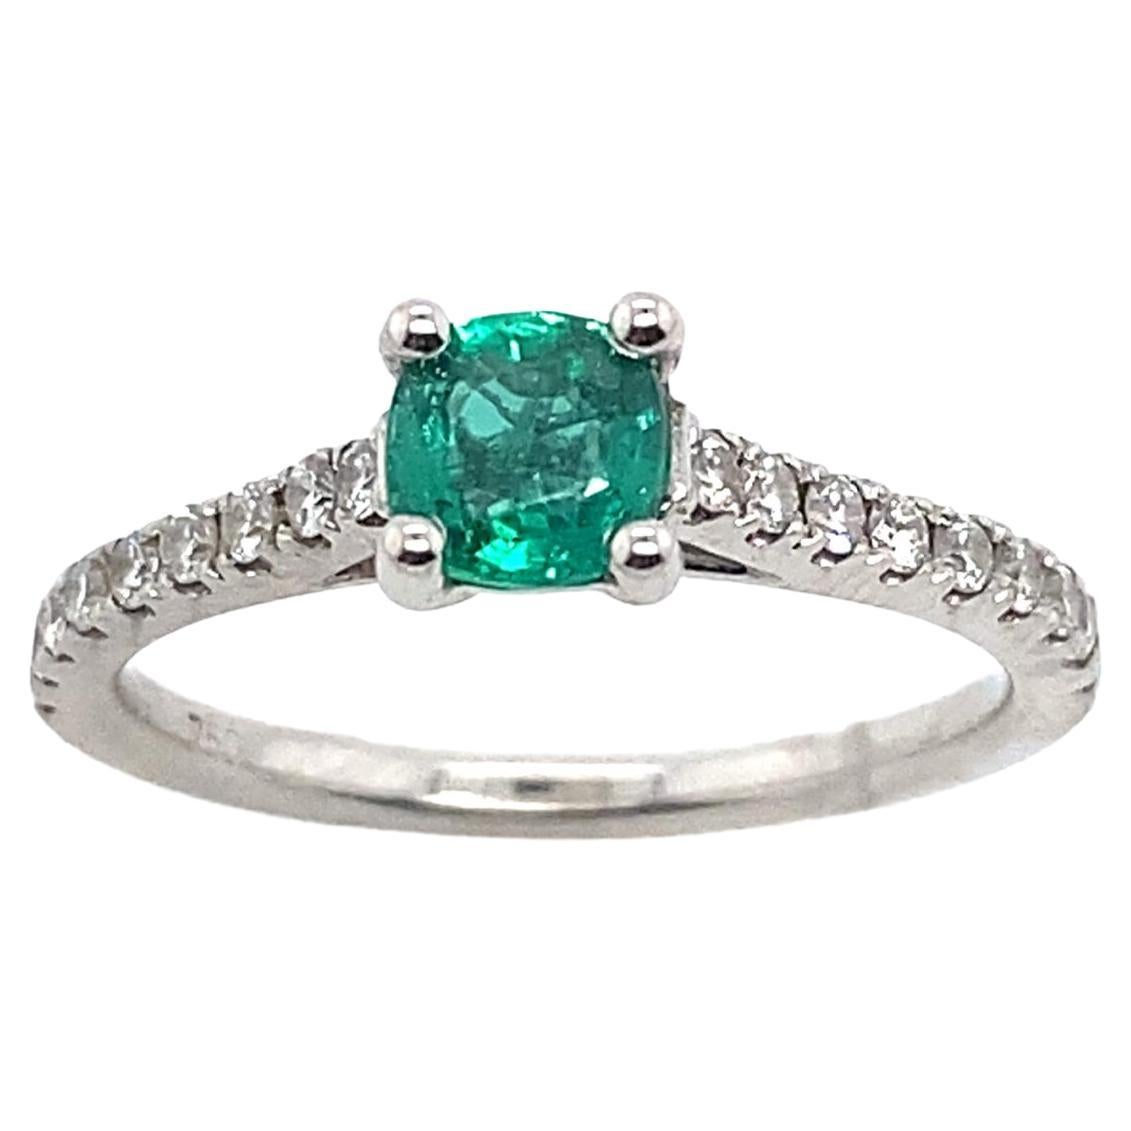 Finest Quality 0.75ct Emerald and 0.30ct Diamond Ring in 18ct White Gold